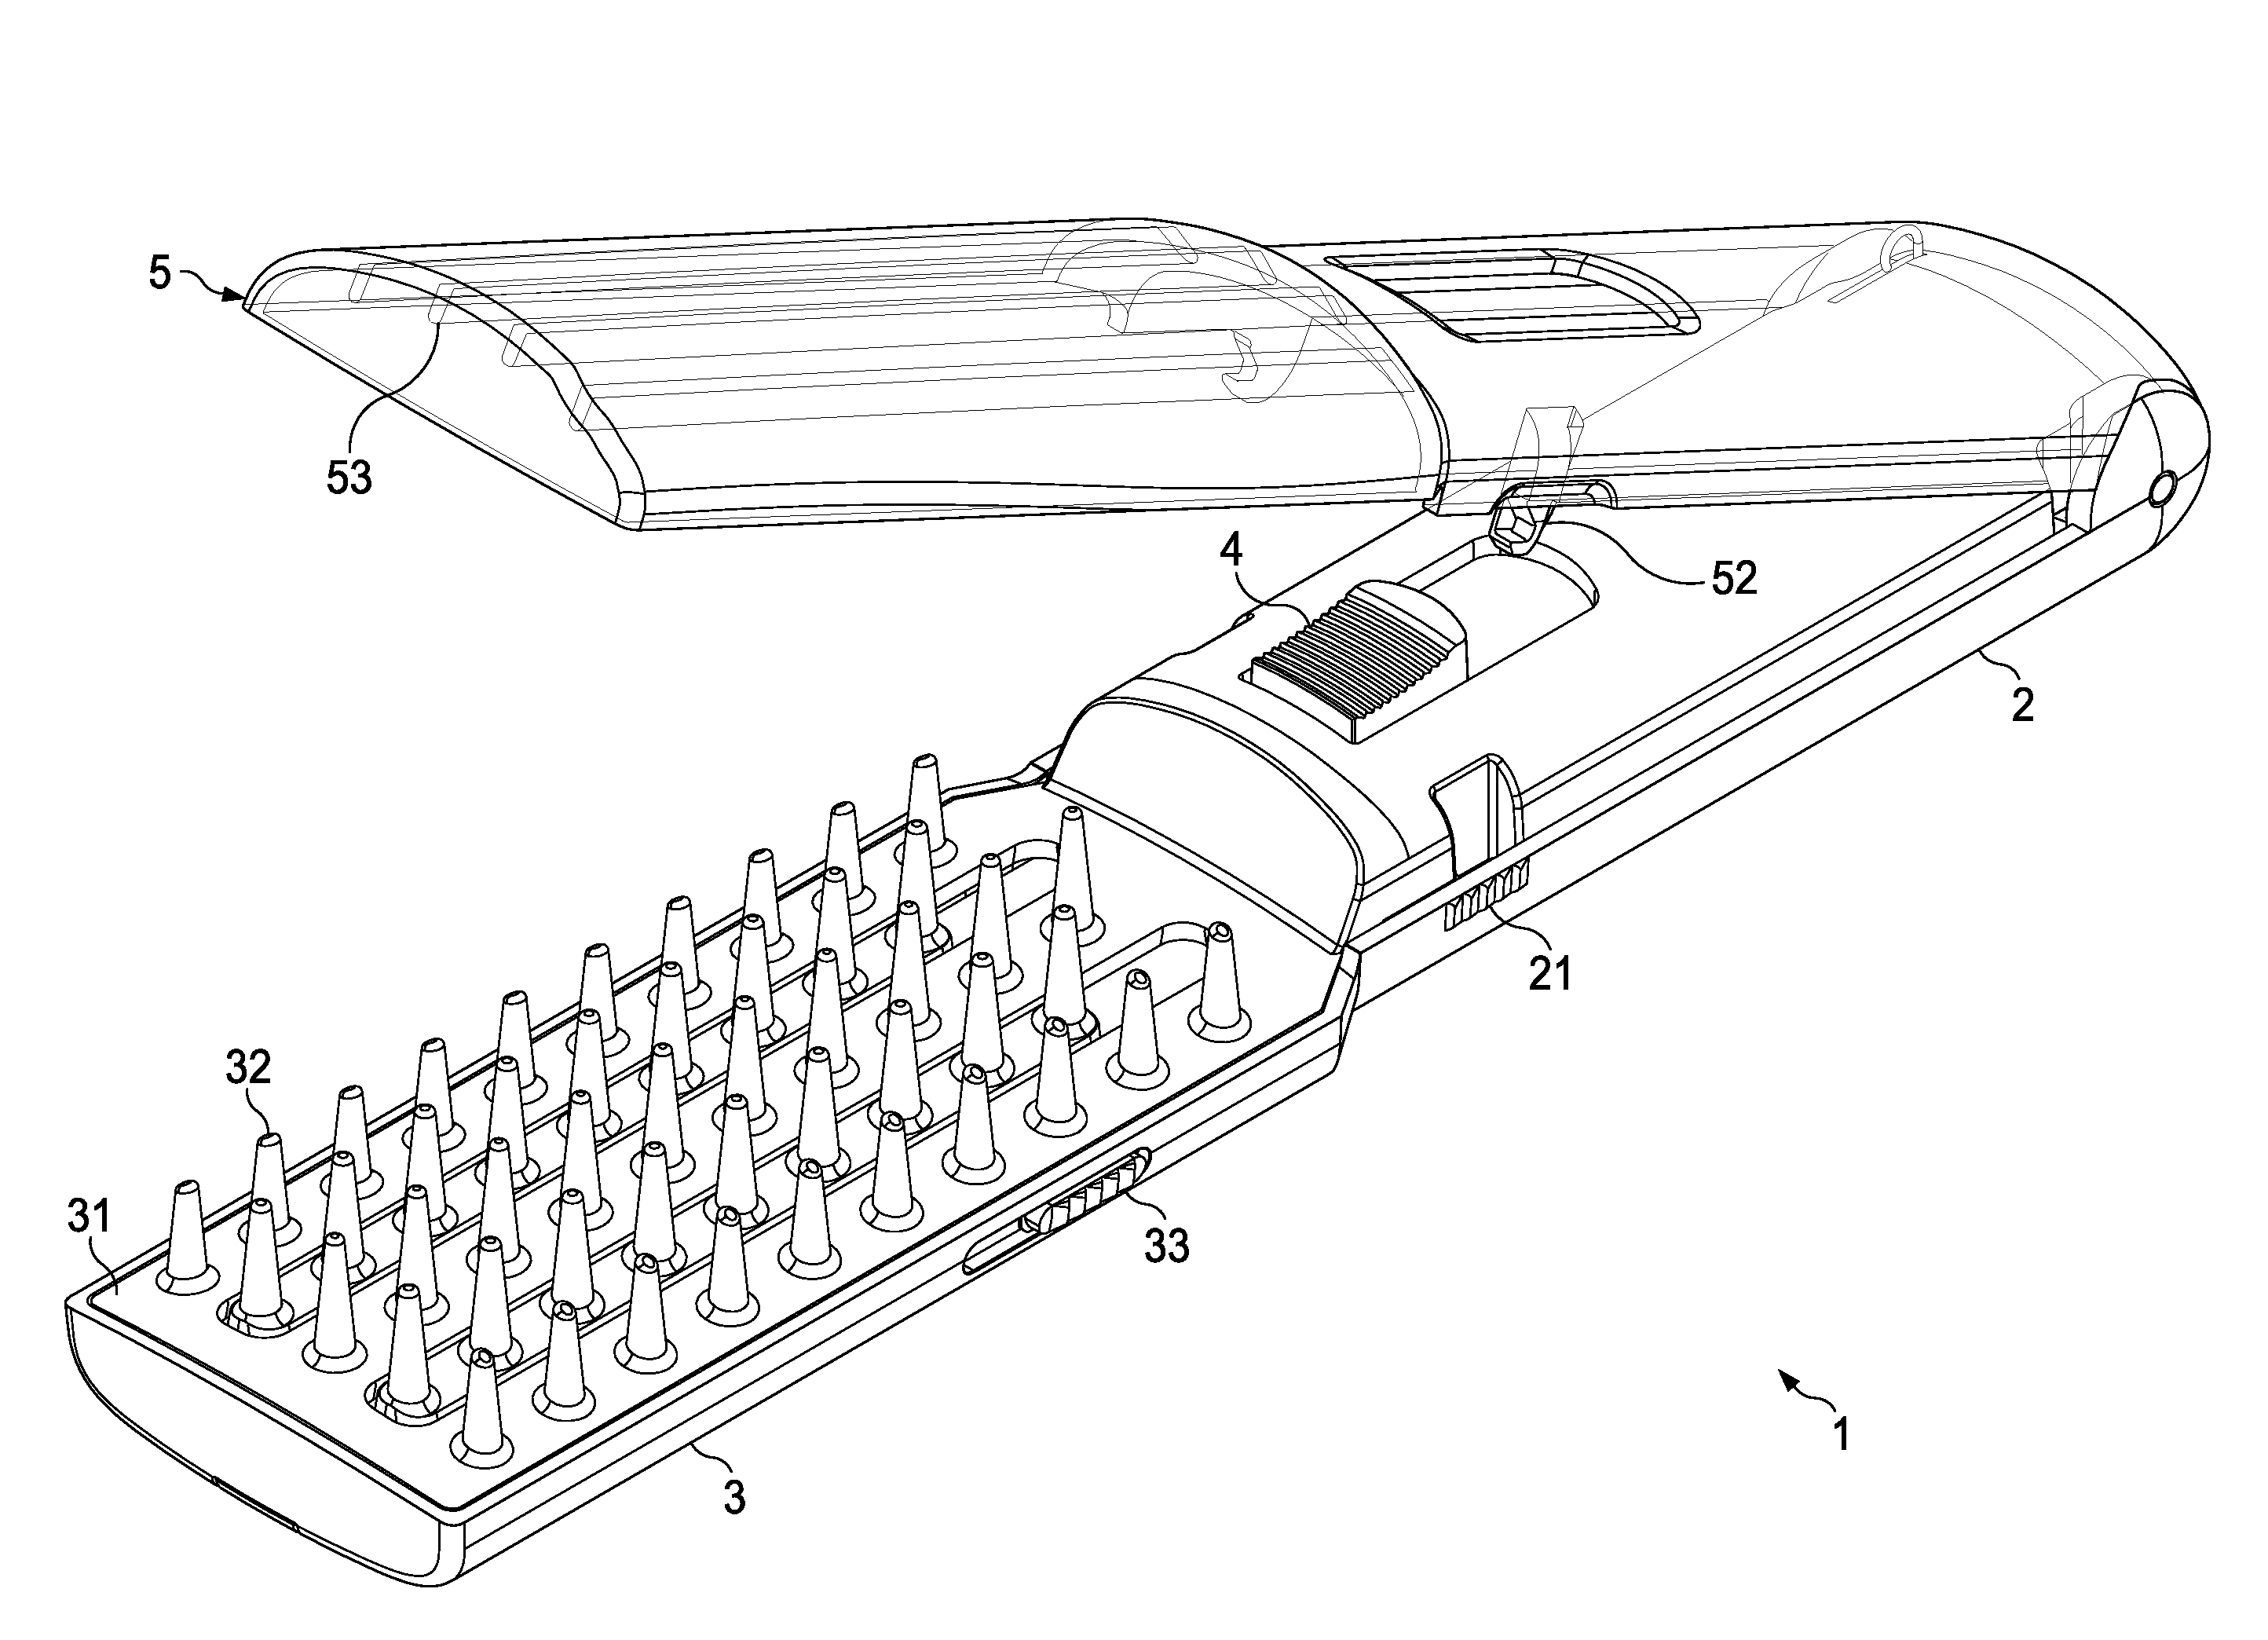 Method to measure and/or adjust combing resistance by using a brush